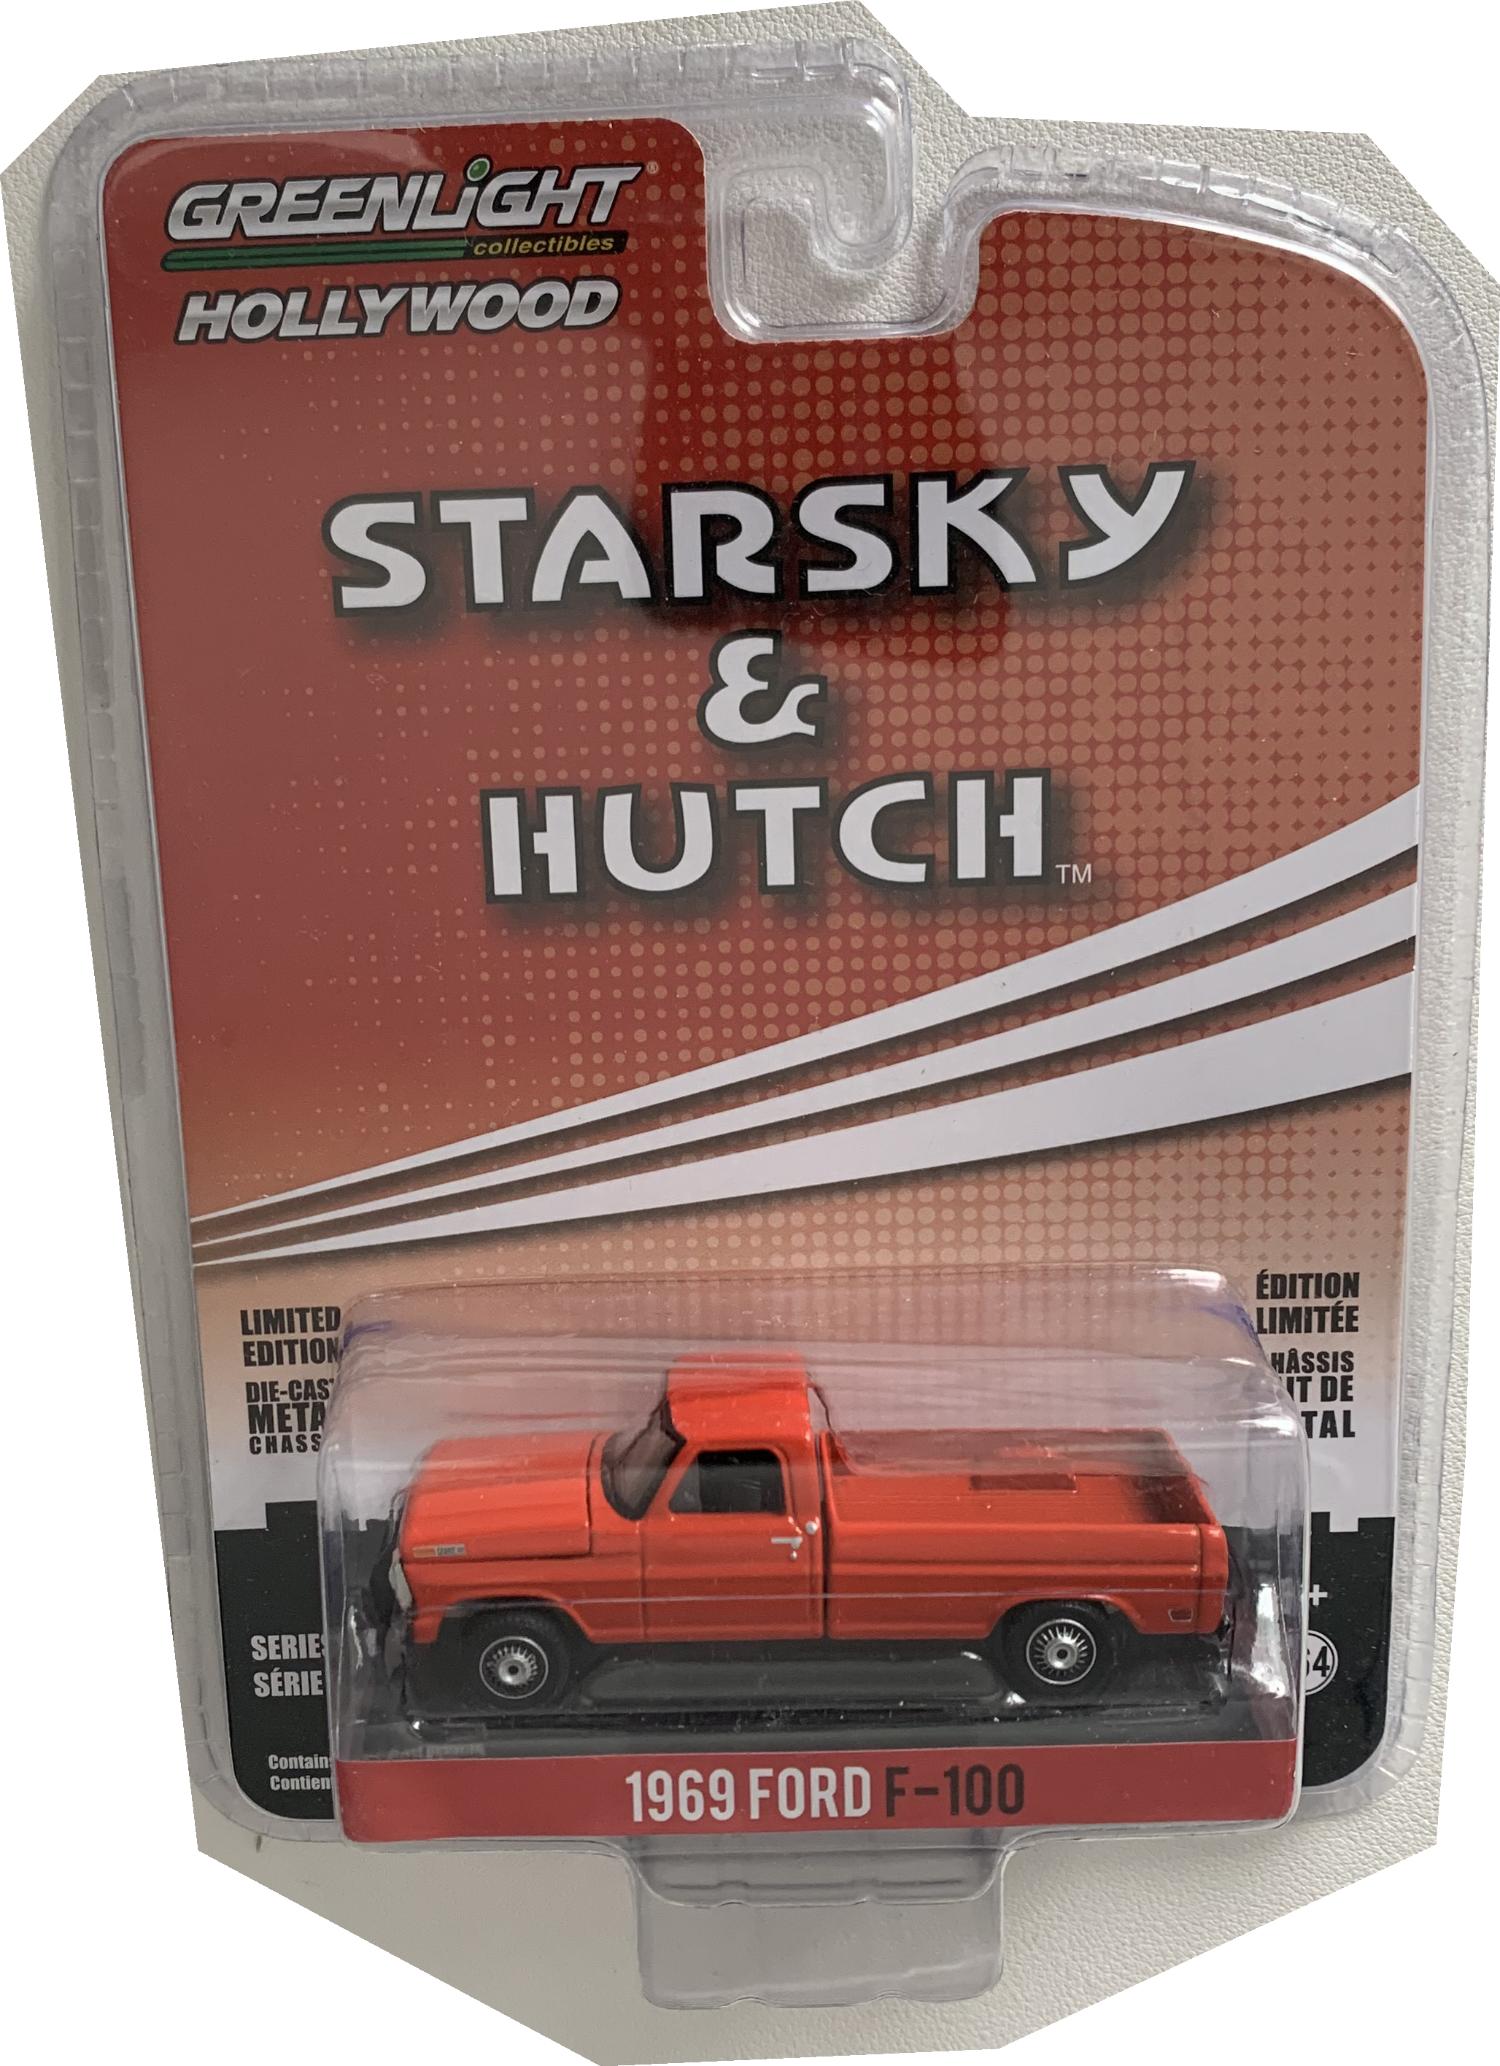 Starsky & Hutch 1969 Ford F-100 in red 1:64 scale model from Greenlight, limited edition